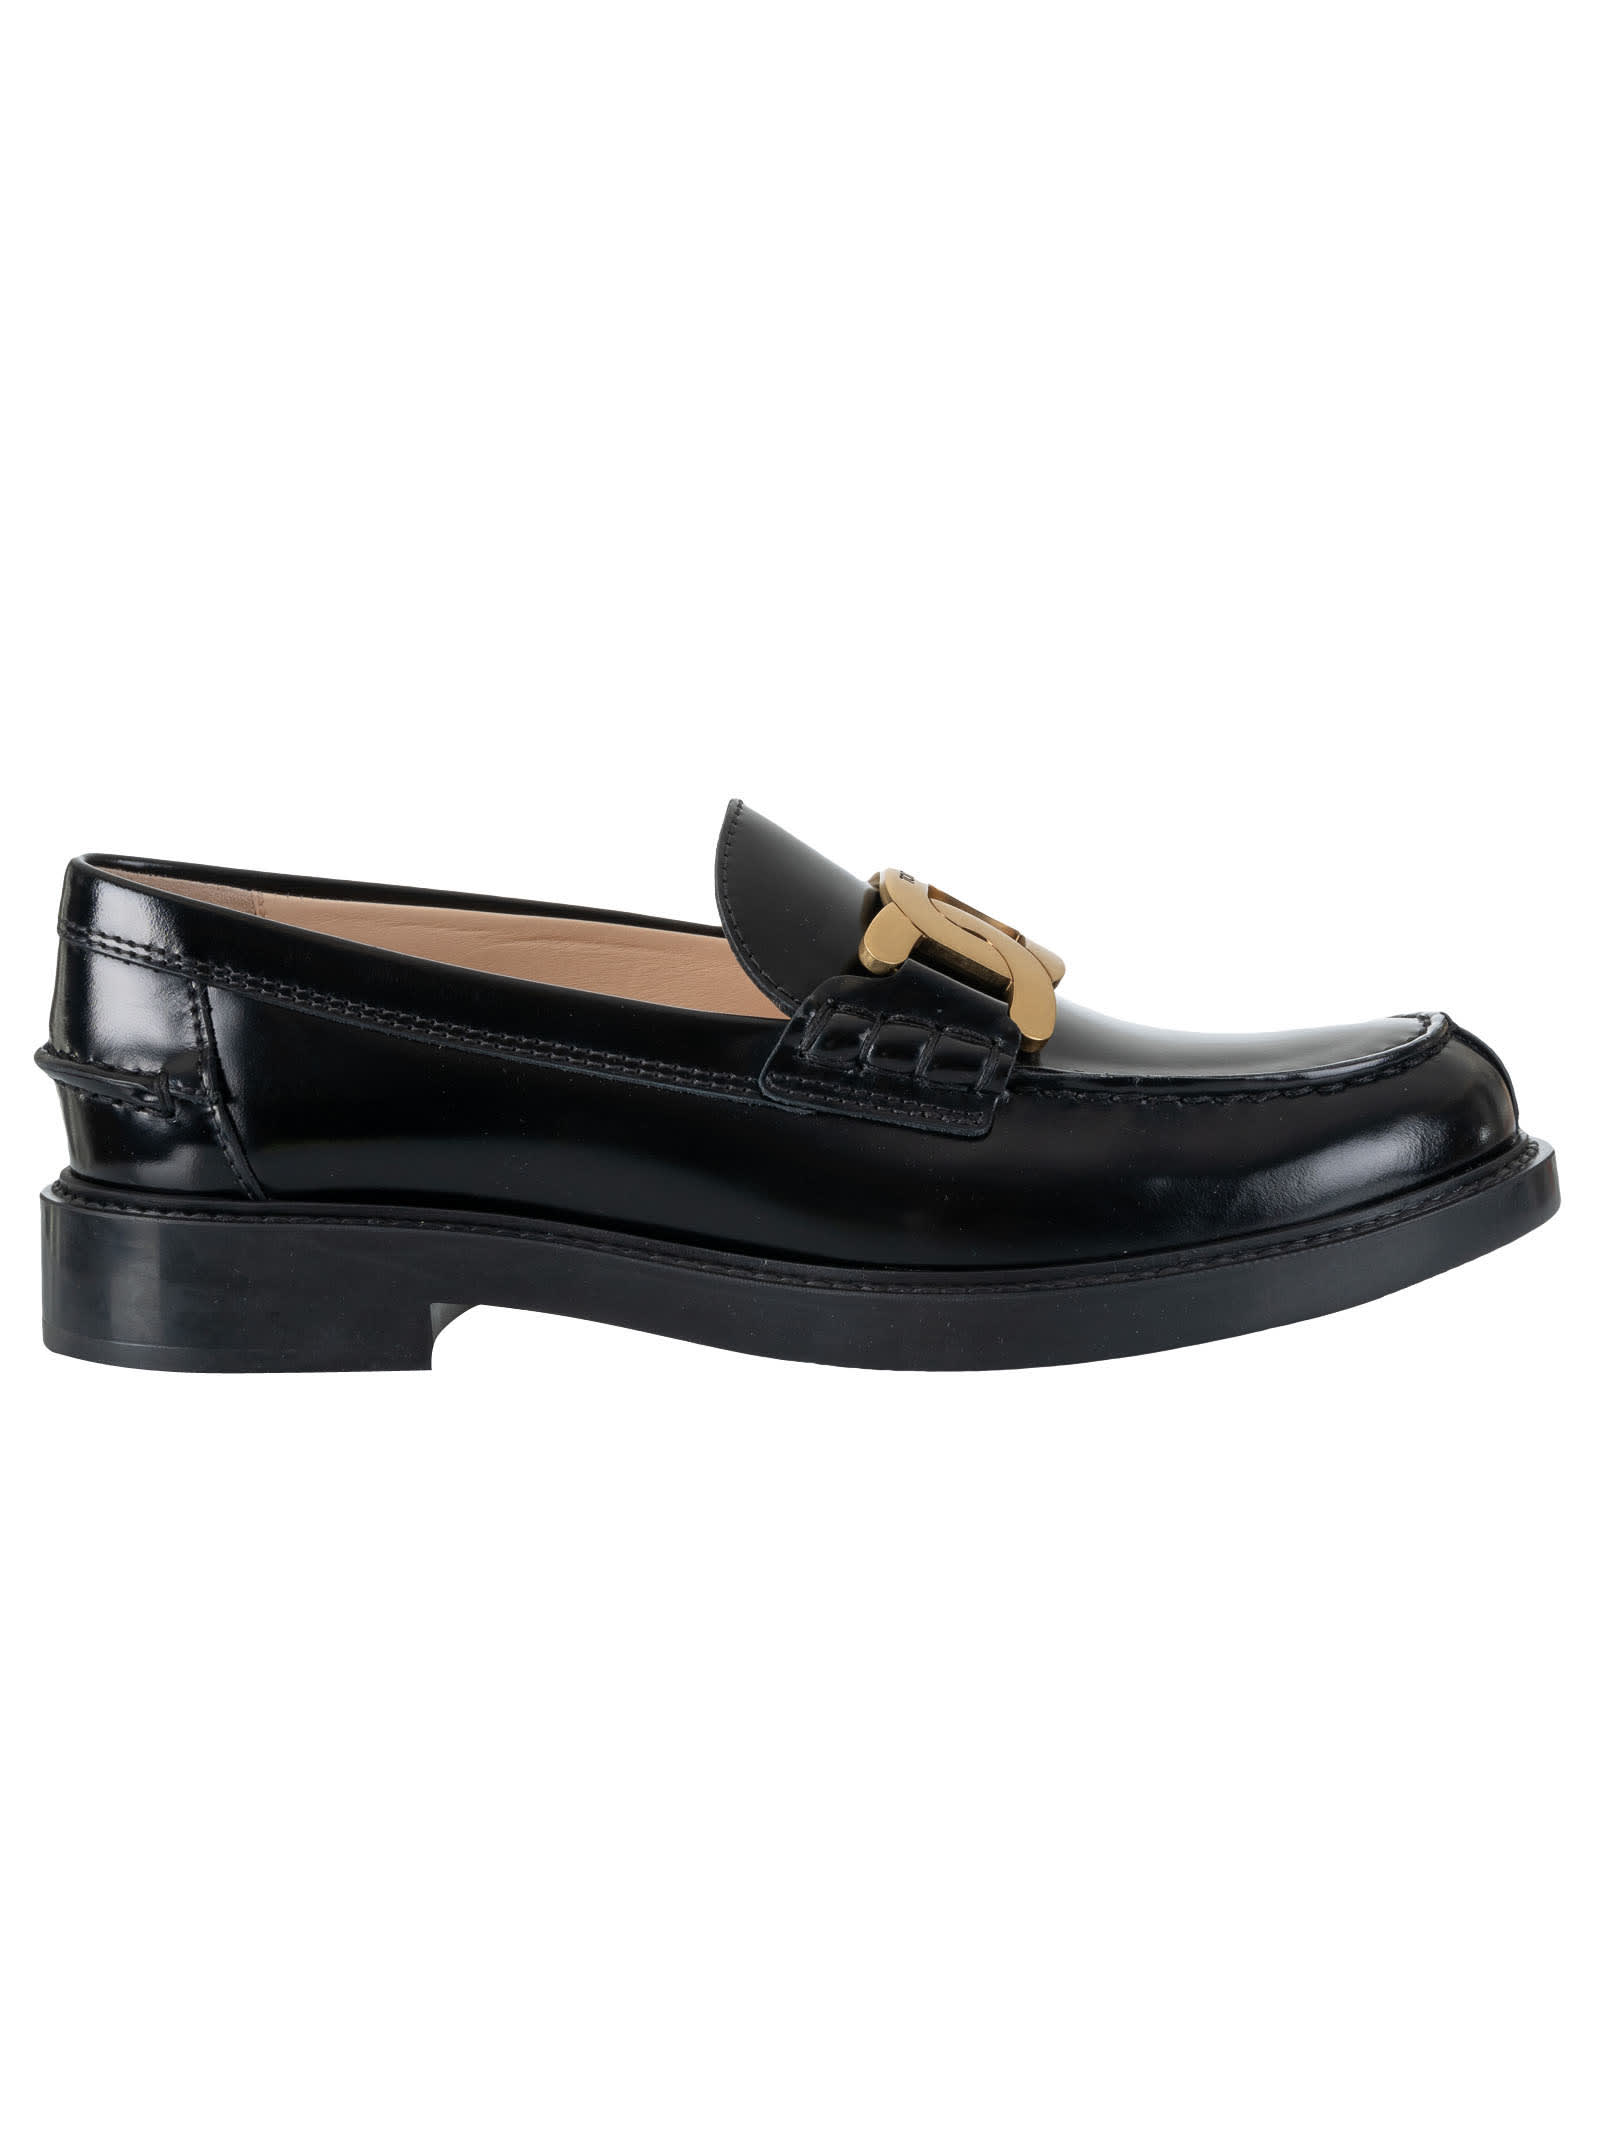 Buy Tods Catena Loafers online, shop Tods shoes with free shipping